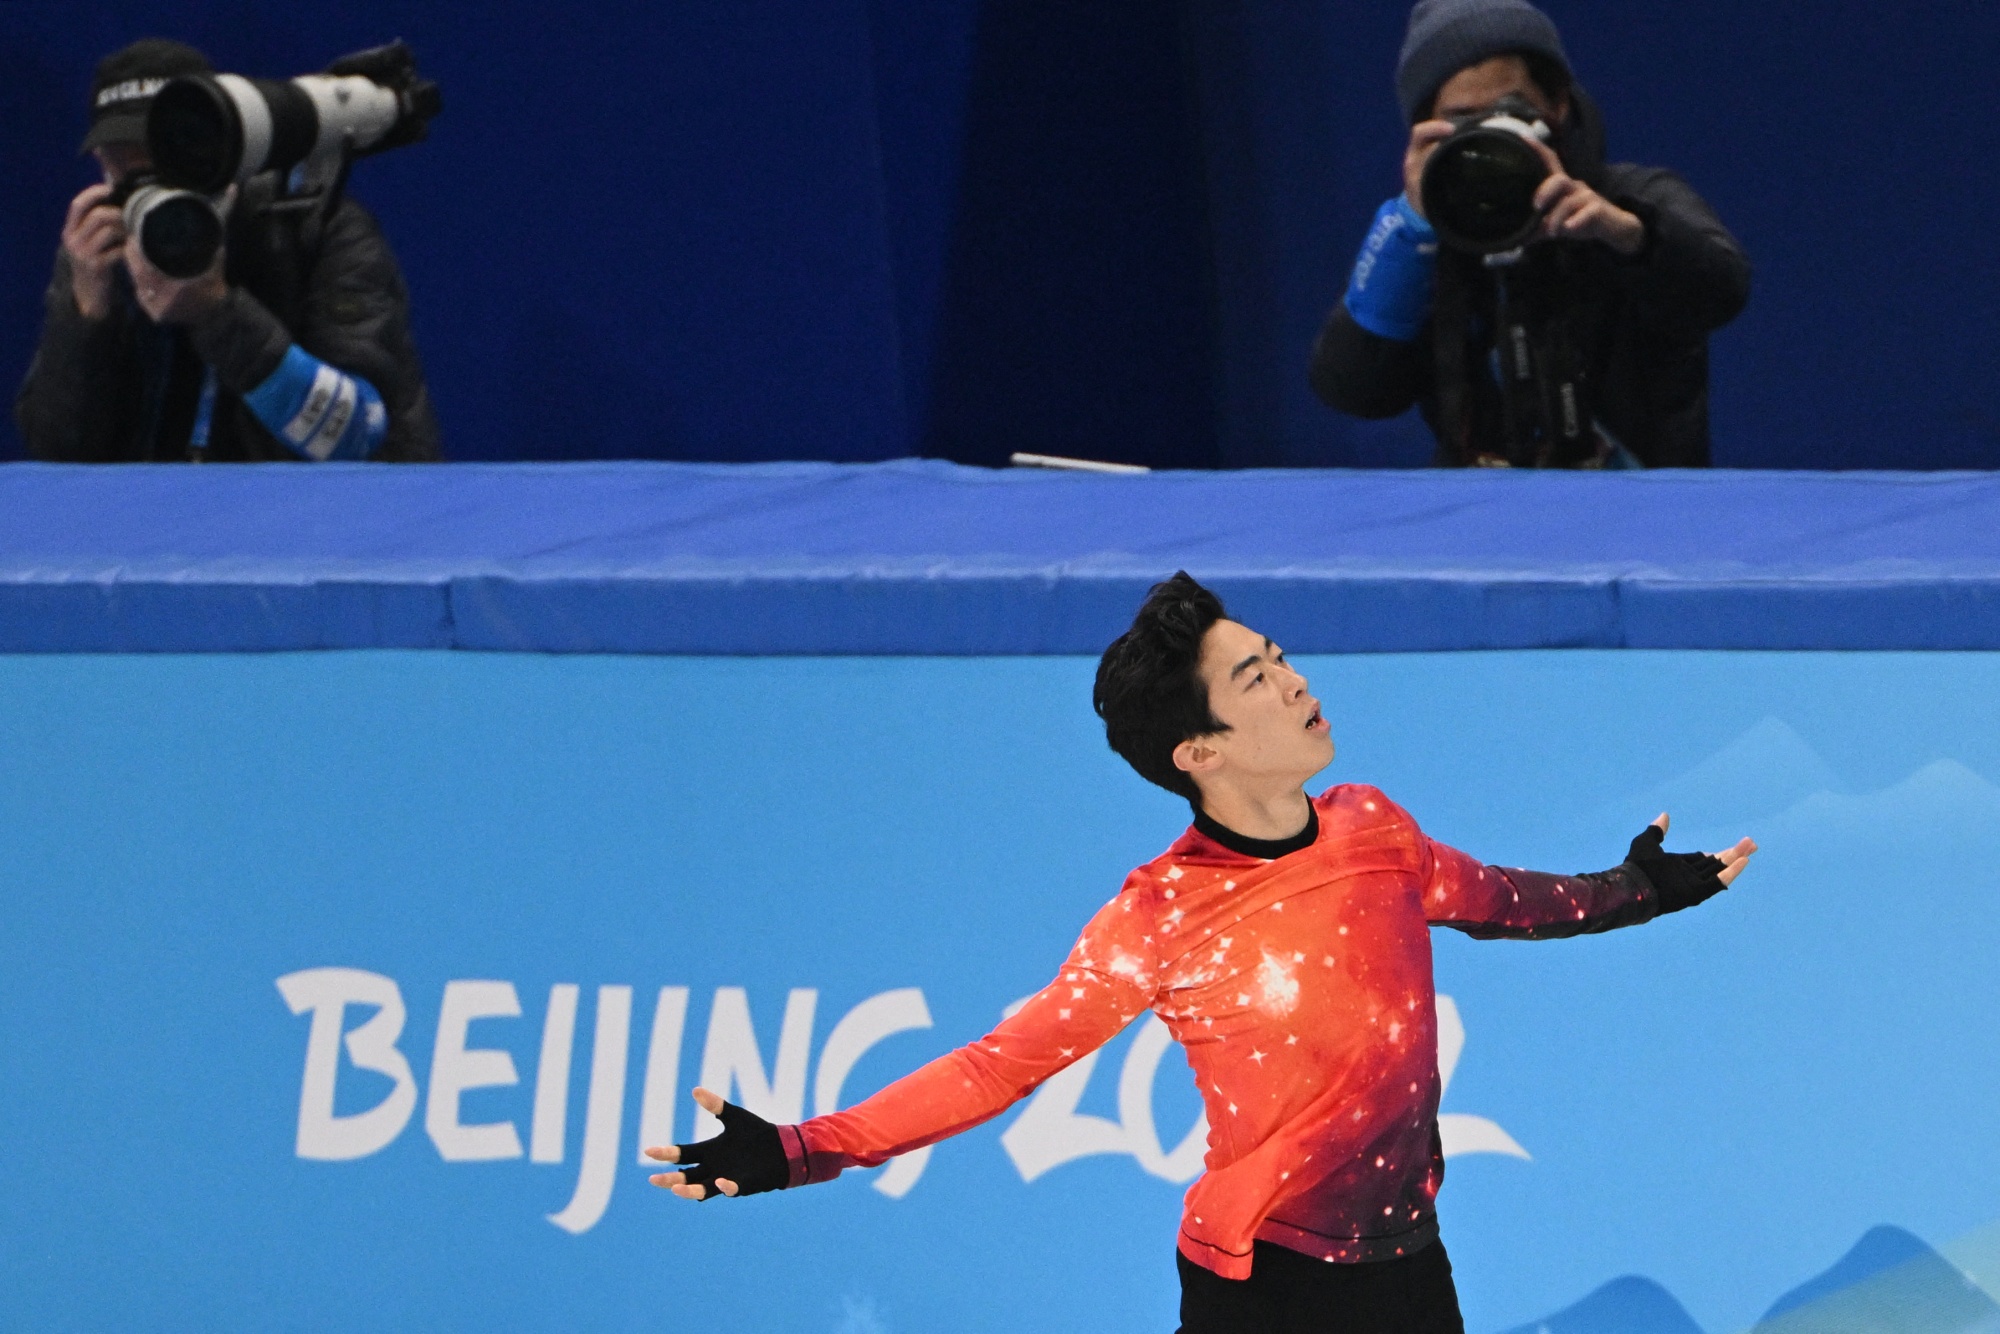 2022 Winter Olympics Live Nathan Chen Wins Figure Skating Gold for US